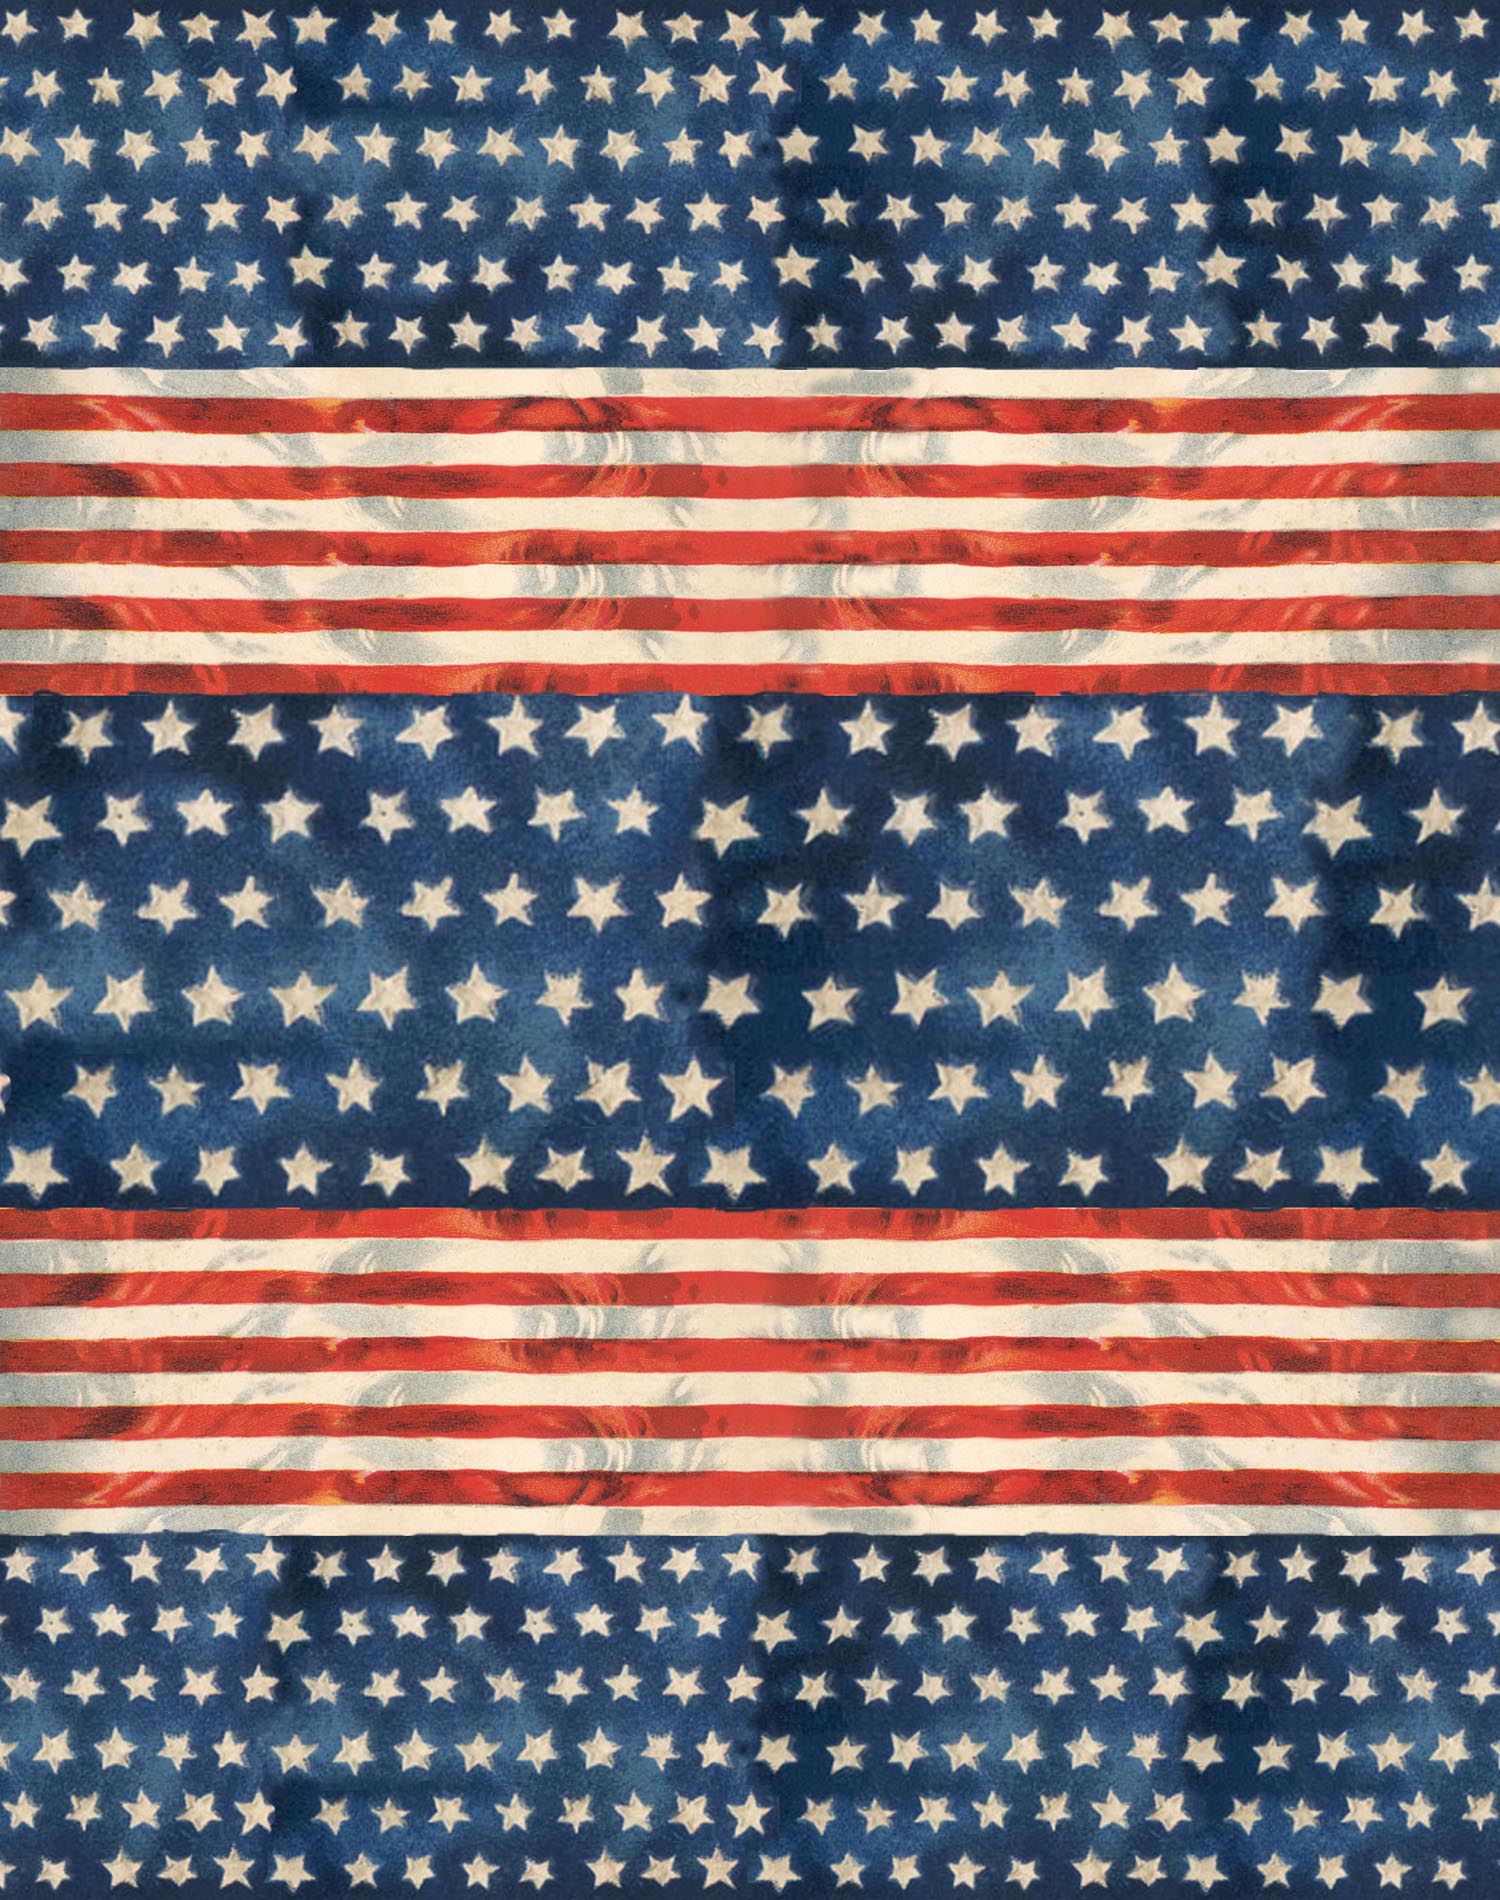 Stars and stripes wallpaper